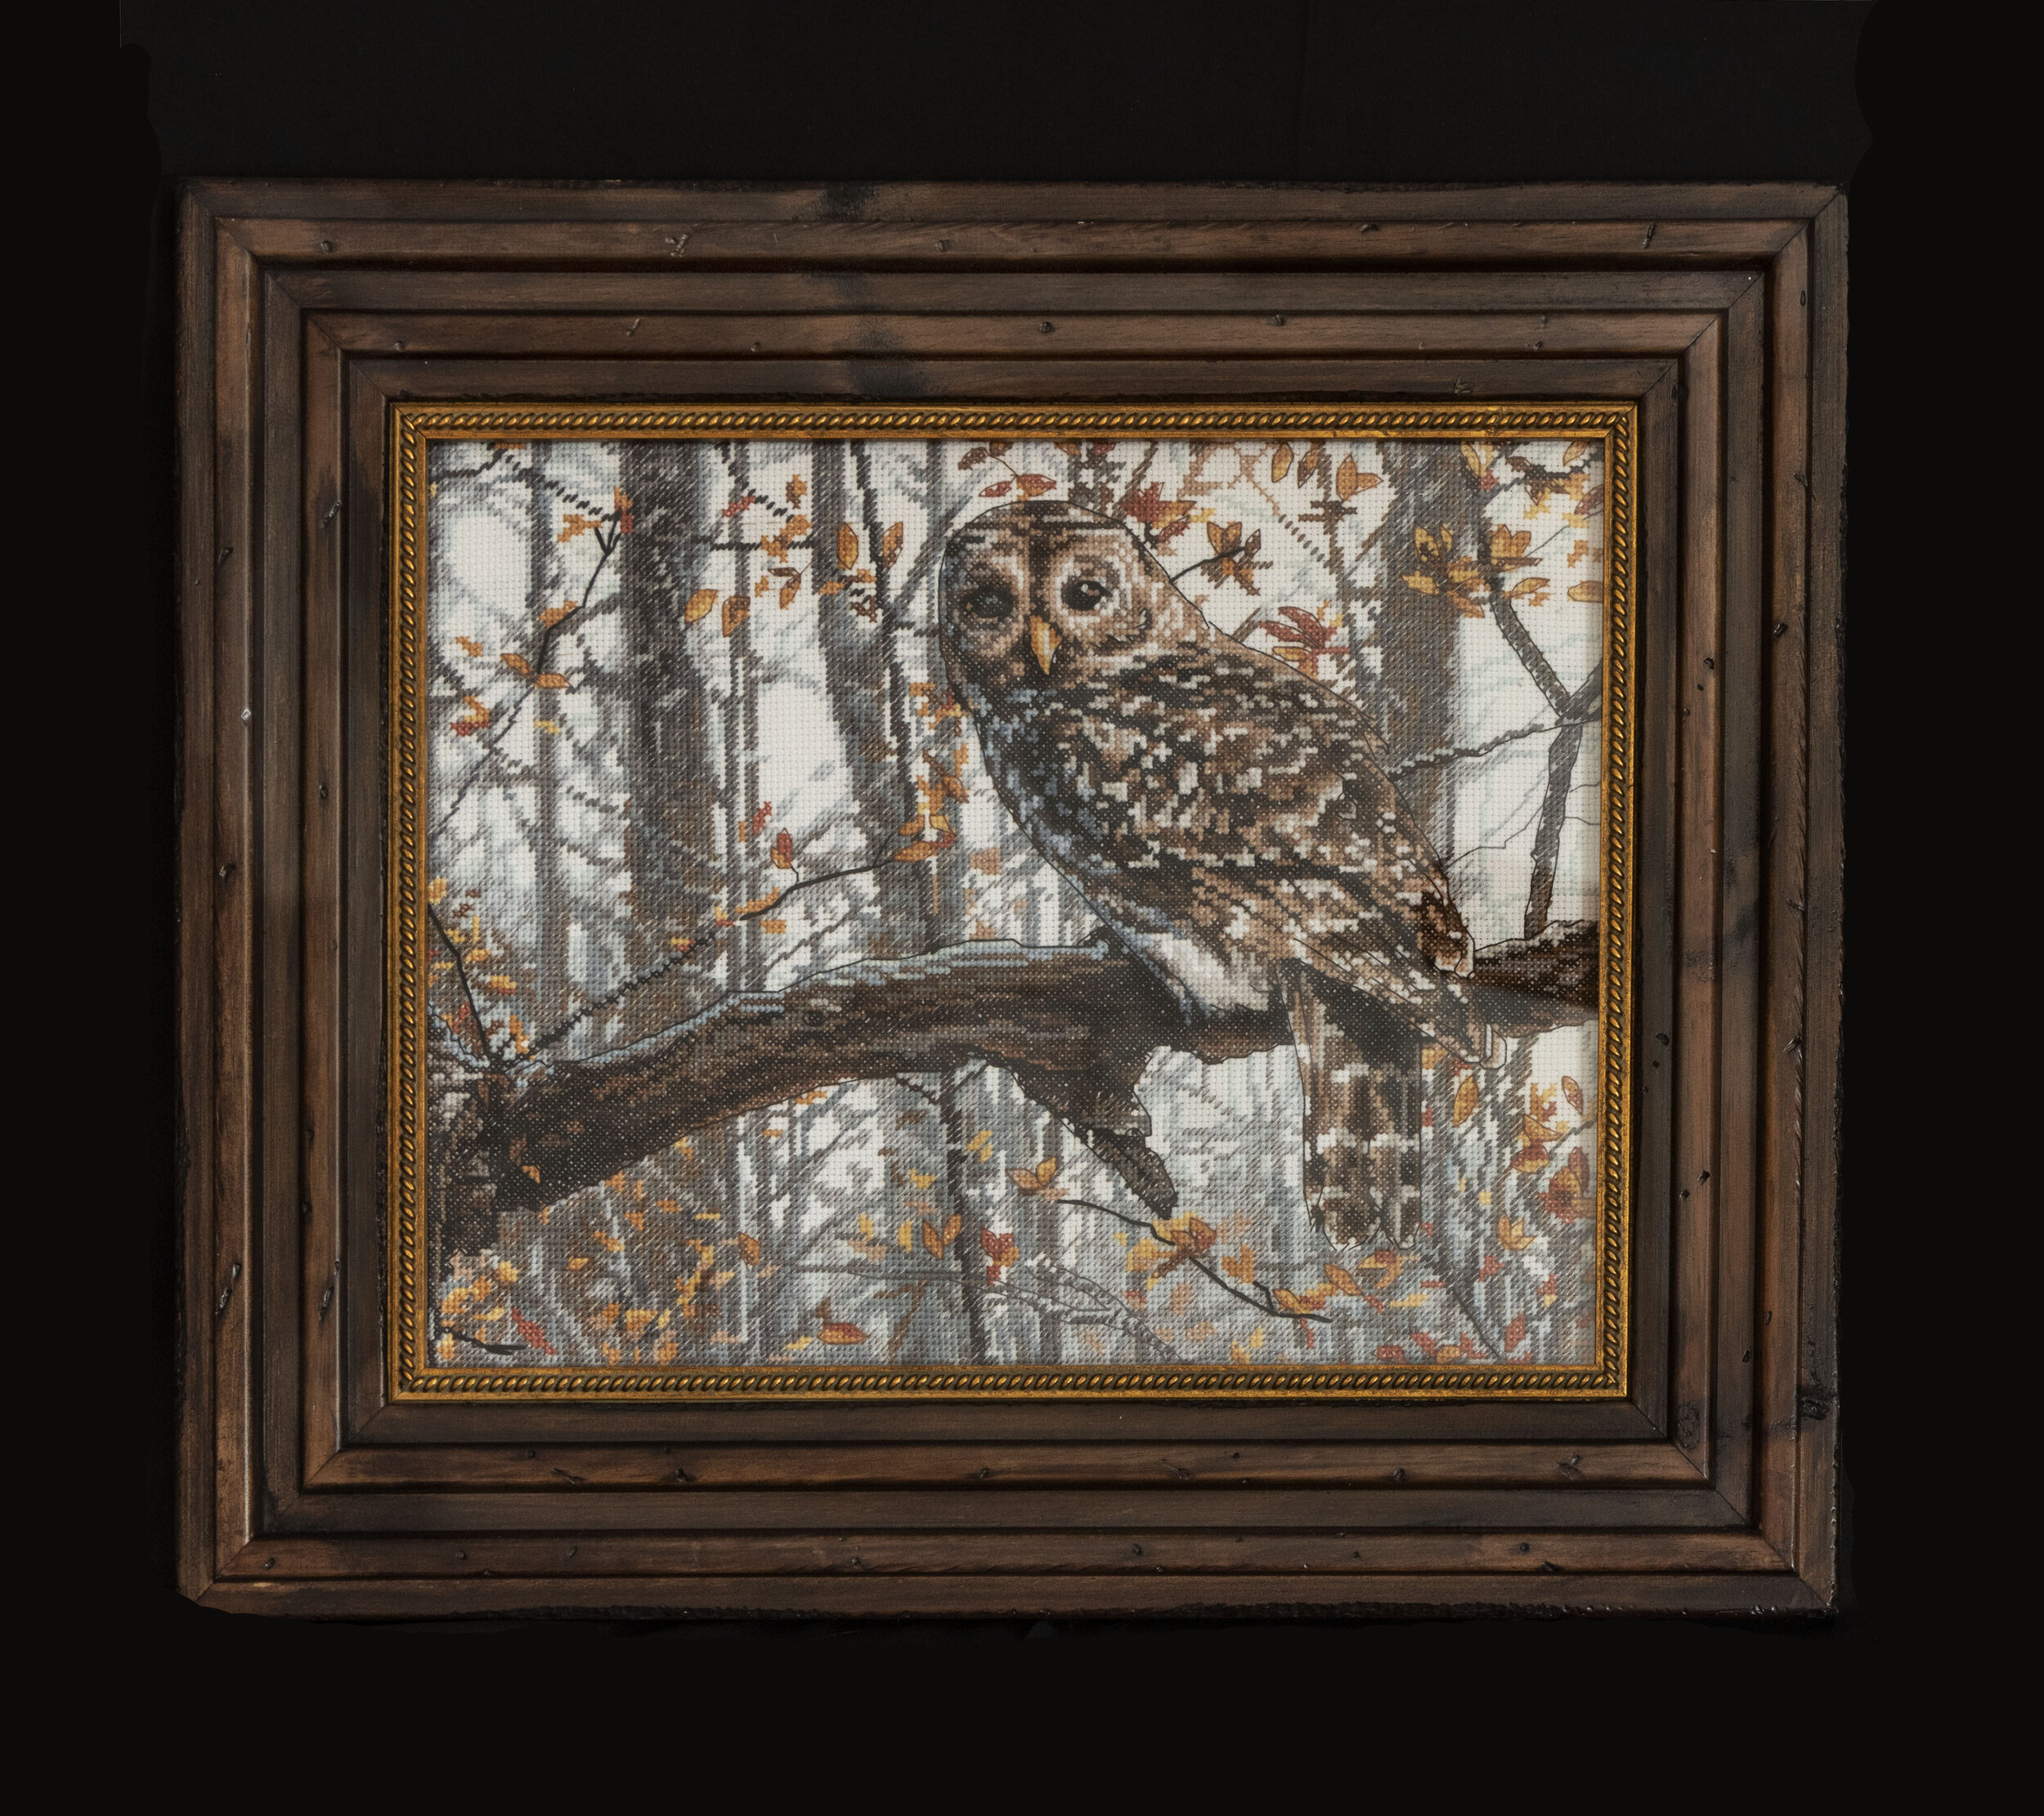 The Wise owl (on tree branch)